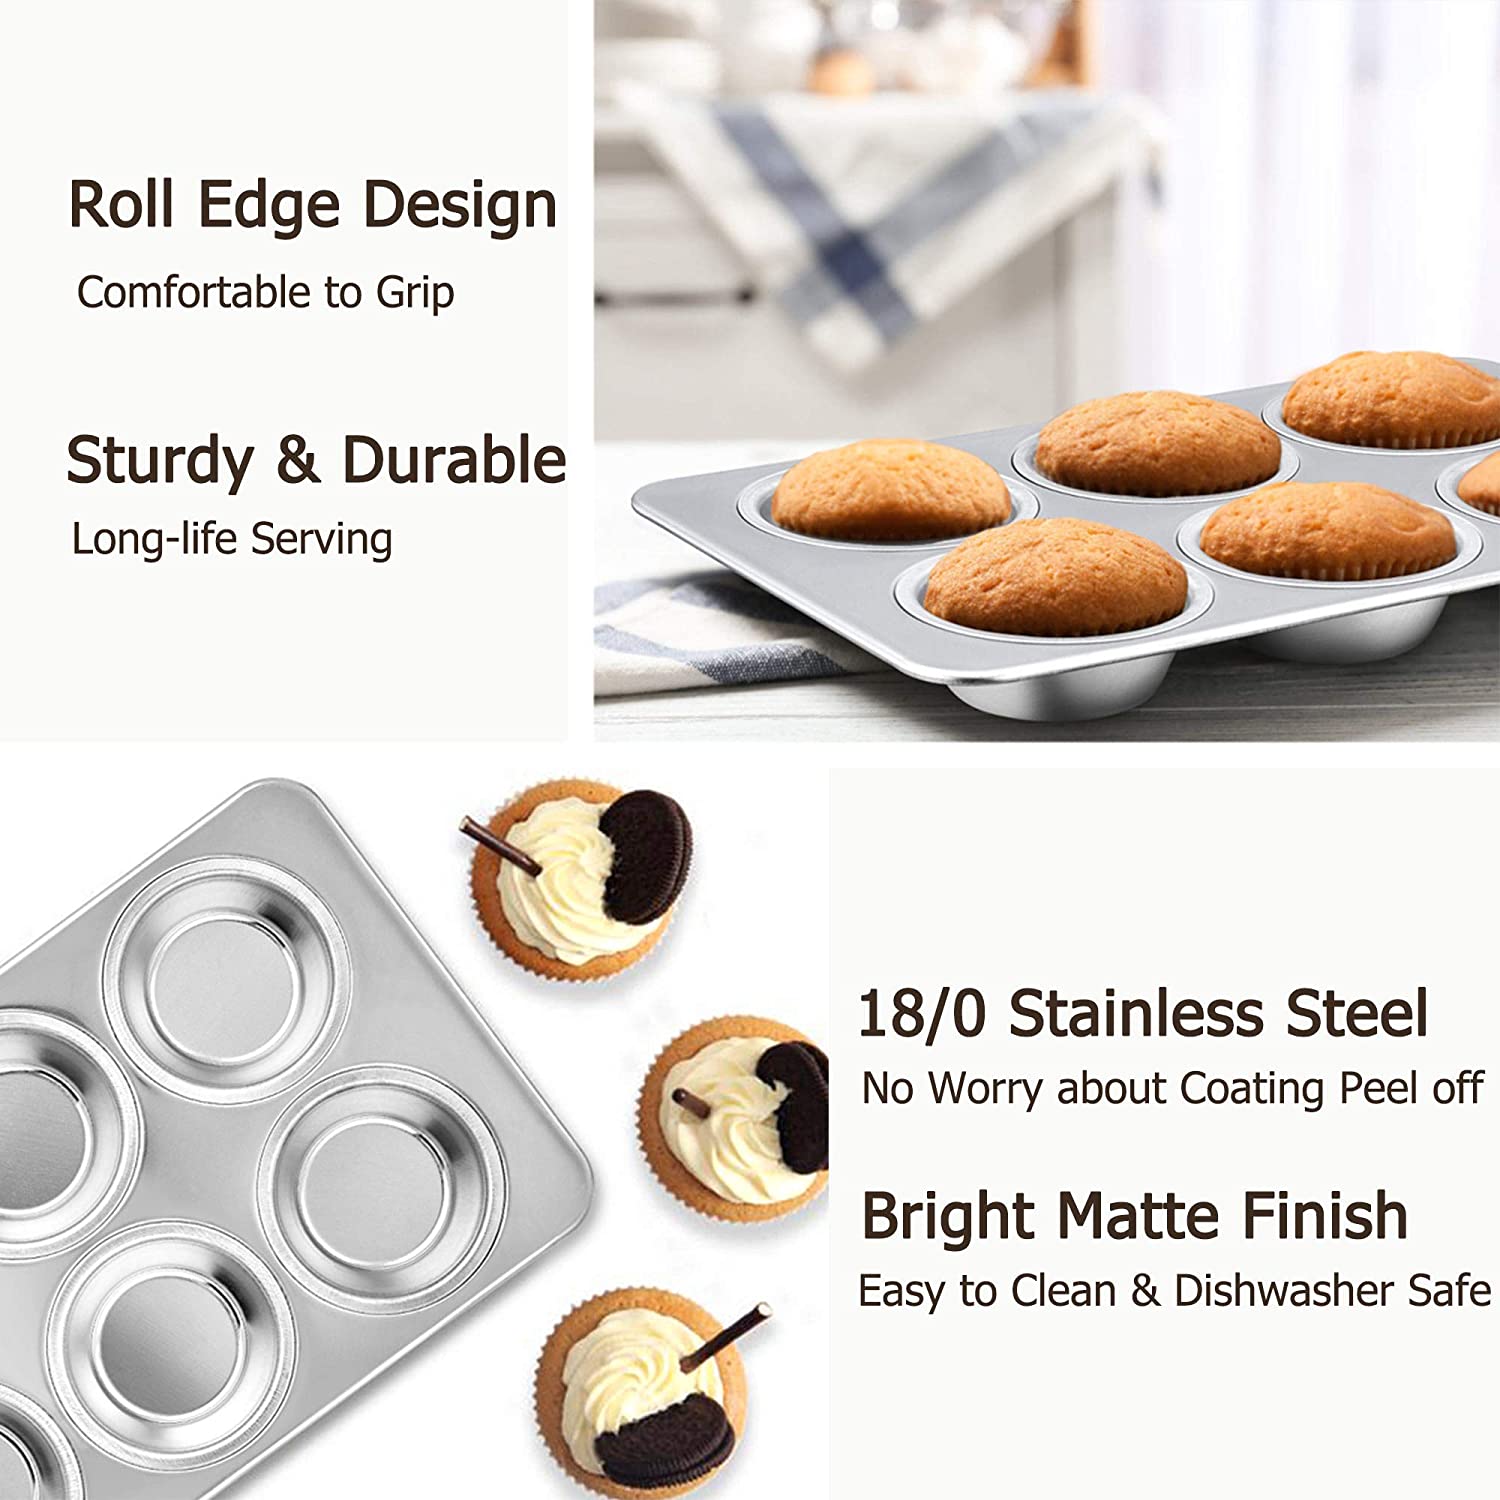  E-far Muffin Pan Set of 2, Stainless Steel Muffin Pan